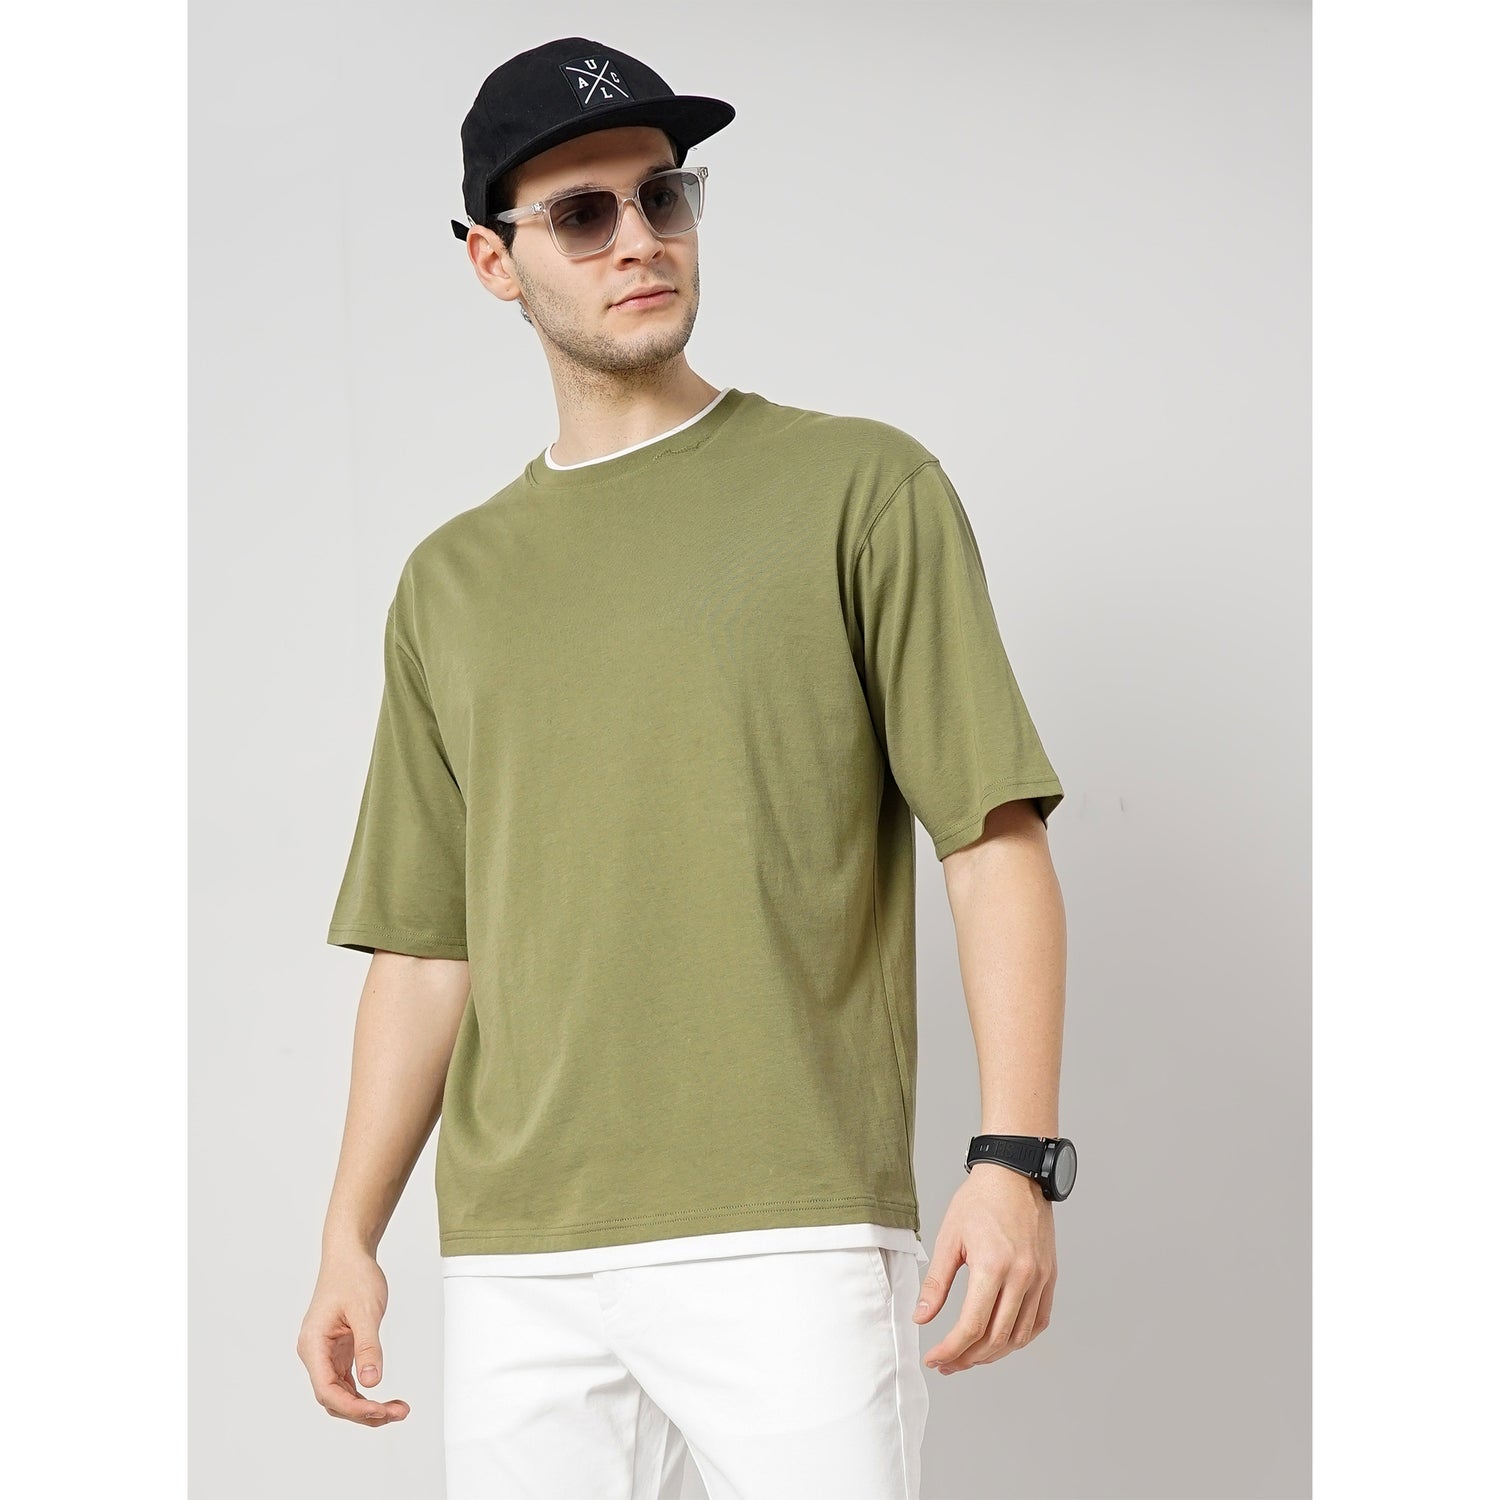 Men's Olive Solid Regular Fit Cotton Tshirts (GETWIN1)